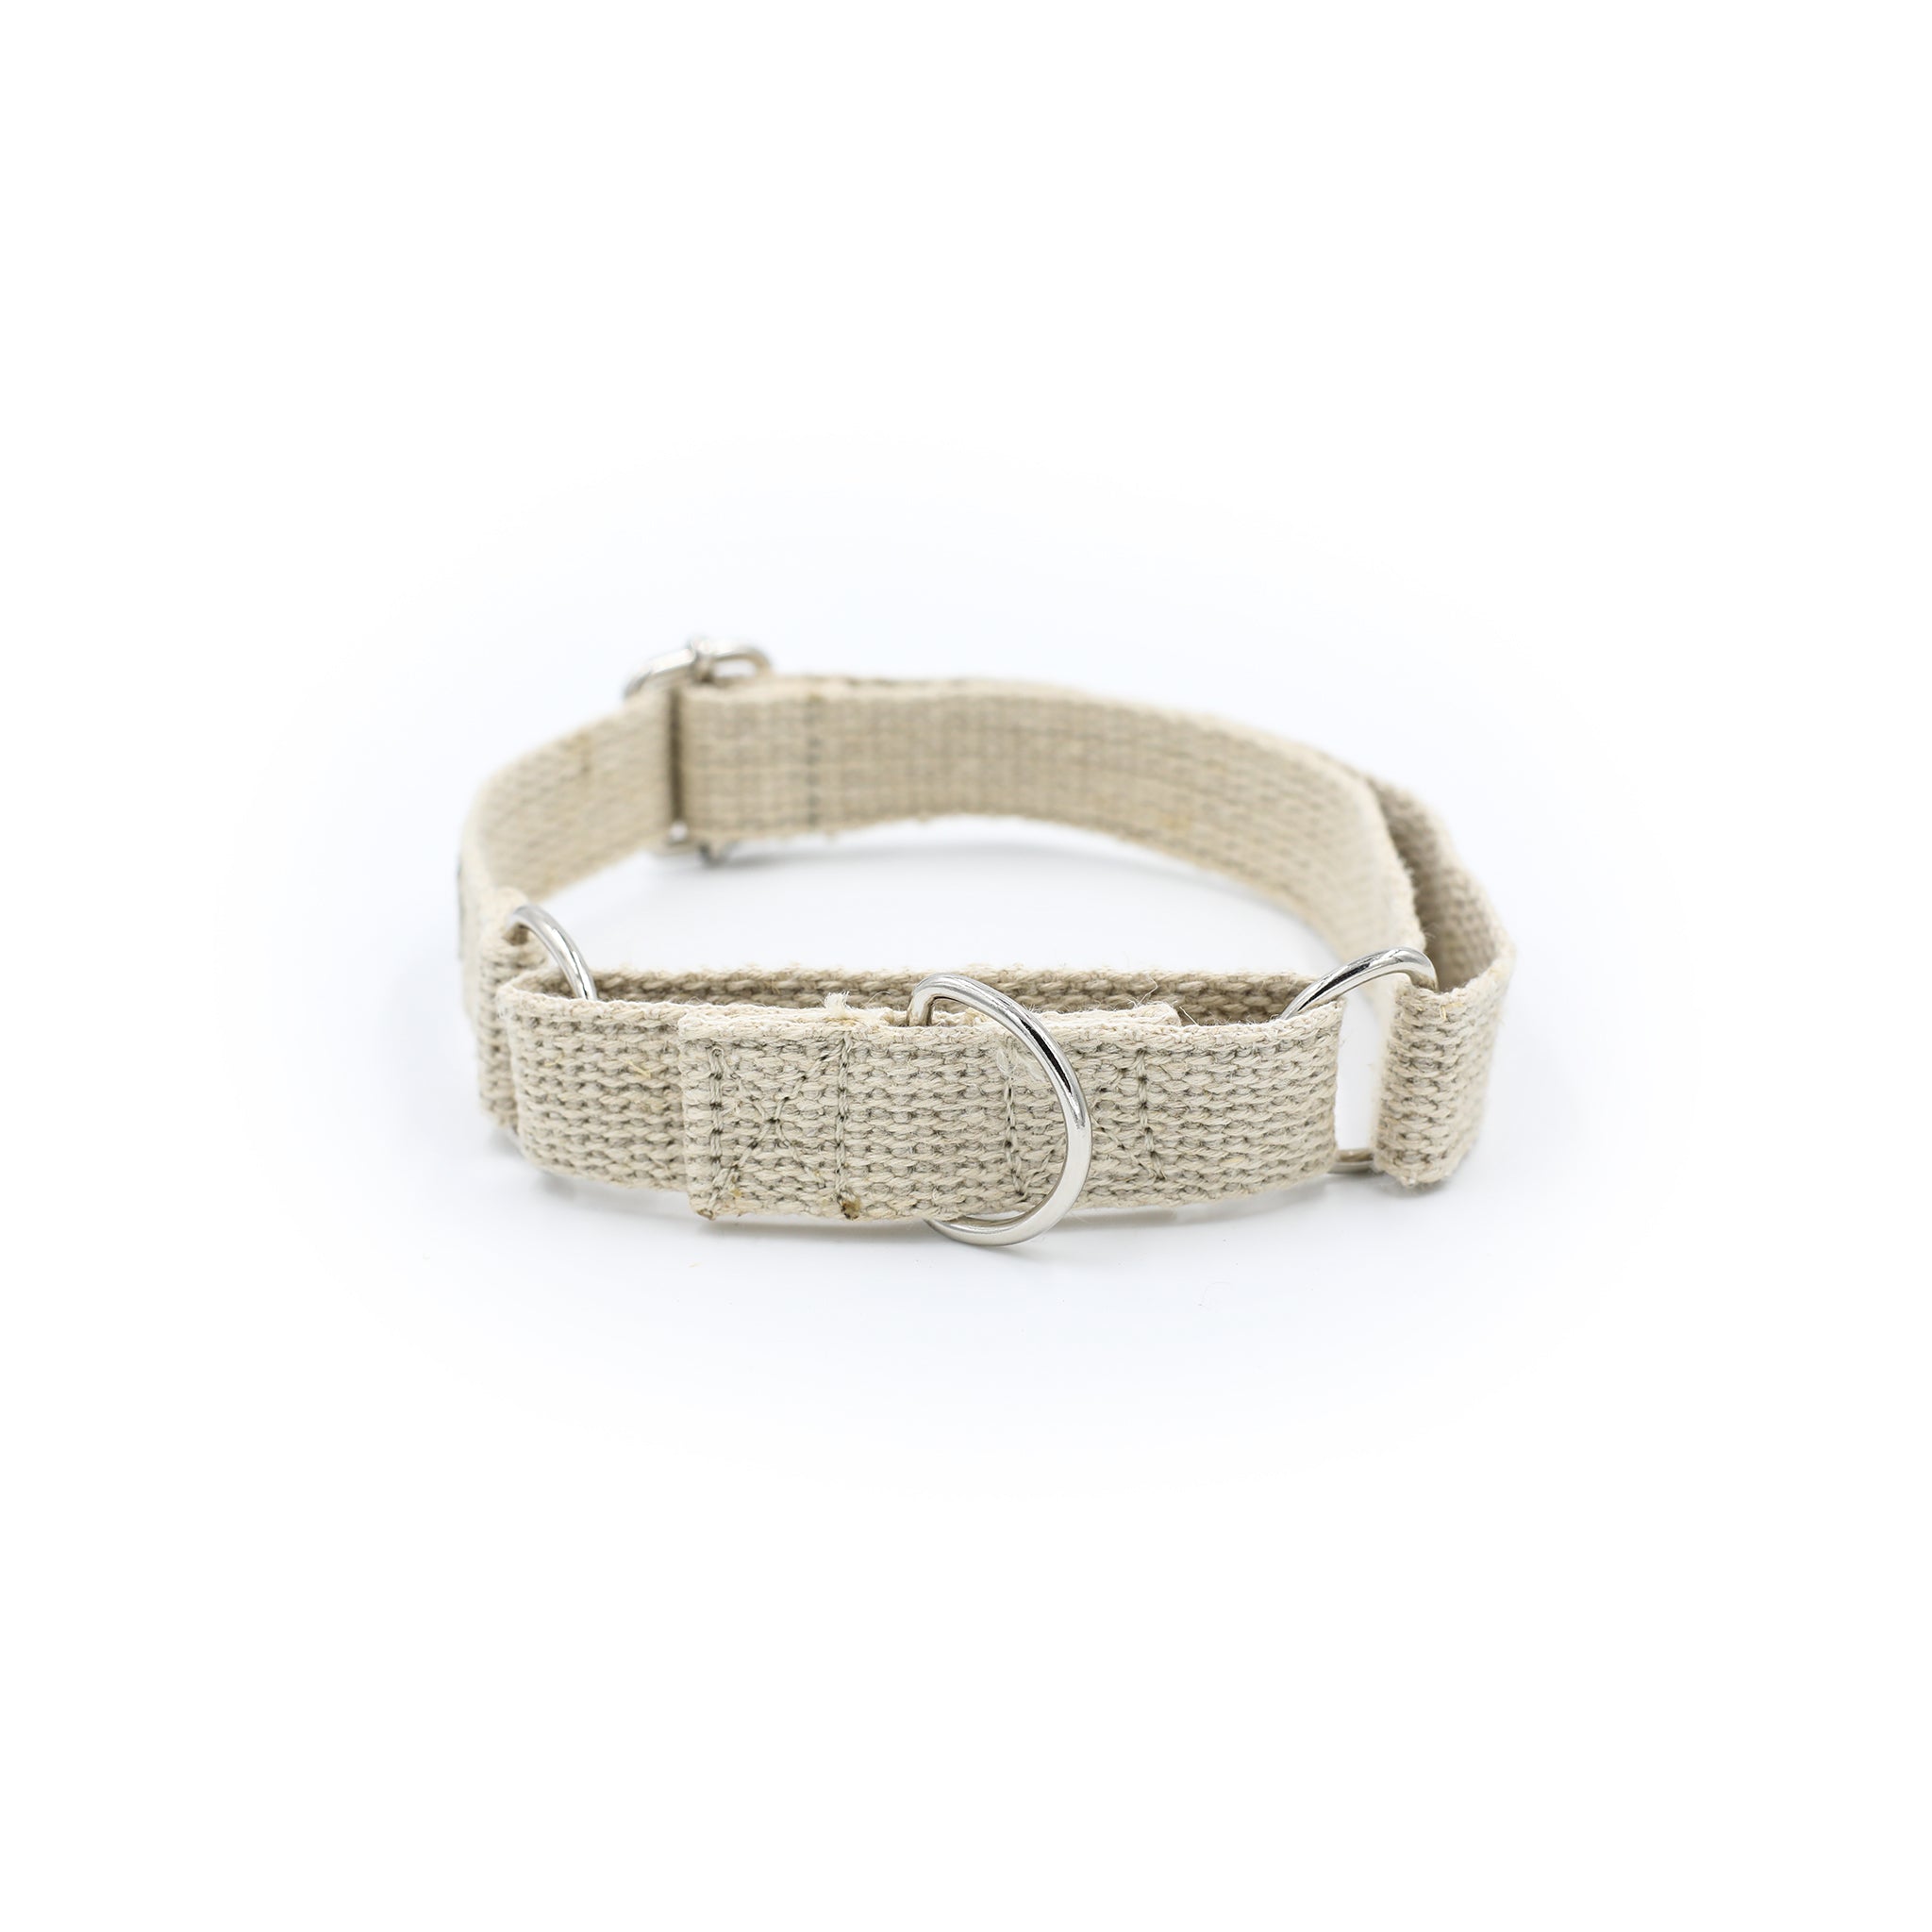 A Hoomans friends natural jute hemp martingale style collar. Placed upon a white background. The natural dog collar is facing so you can see both buckles. This is a size medium.